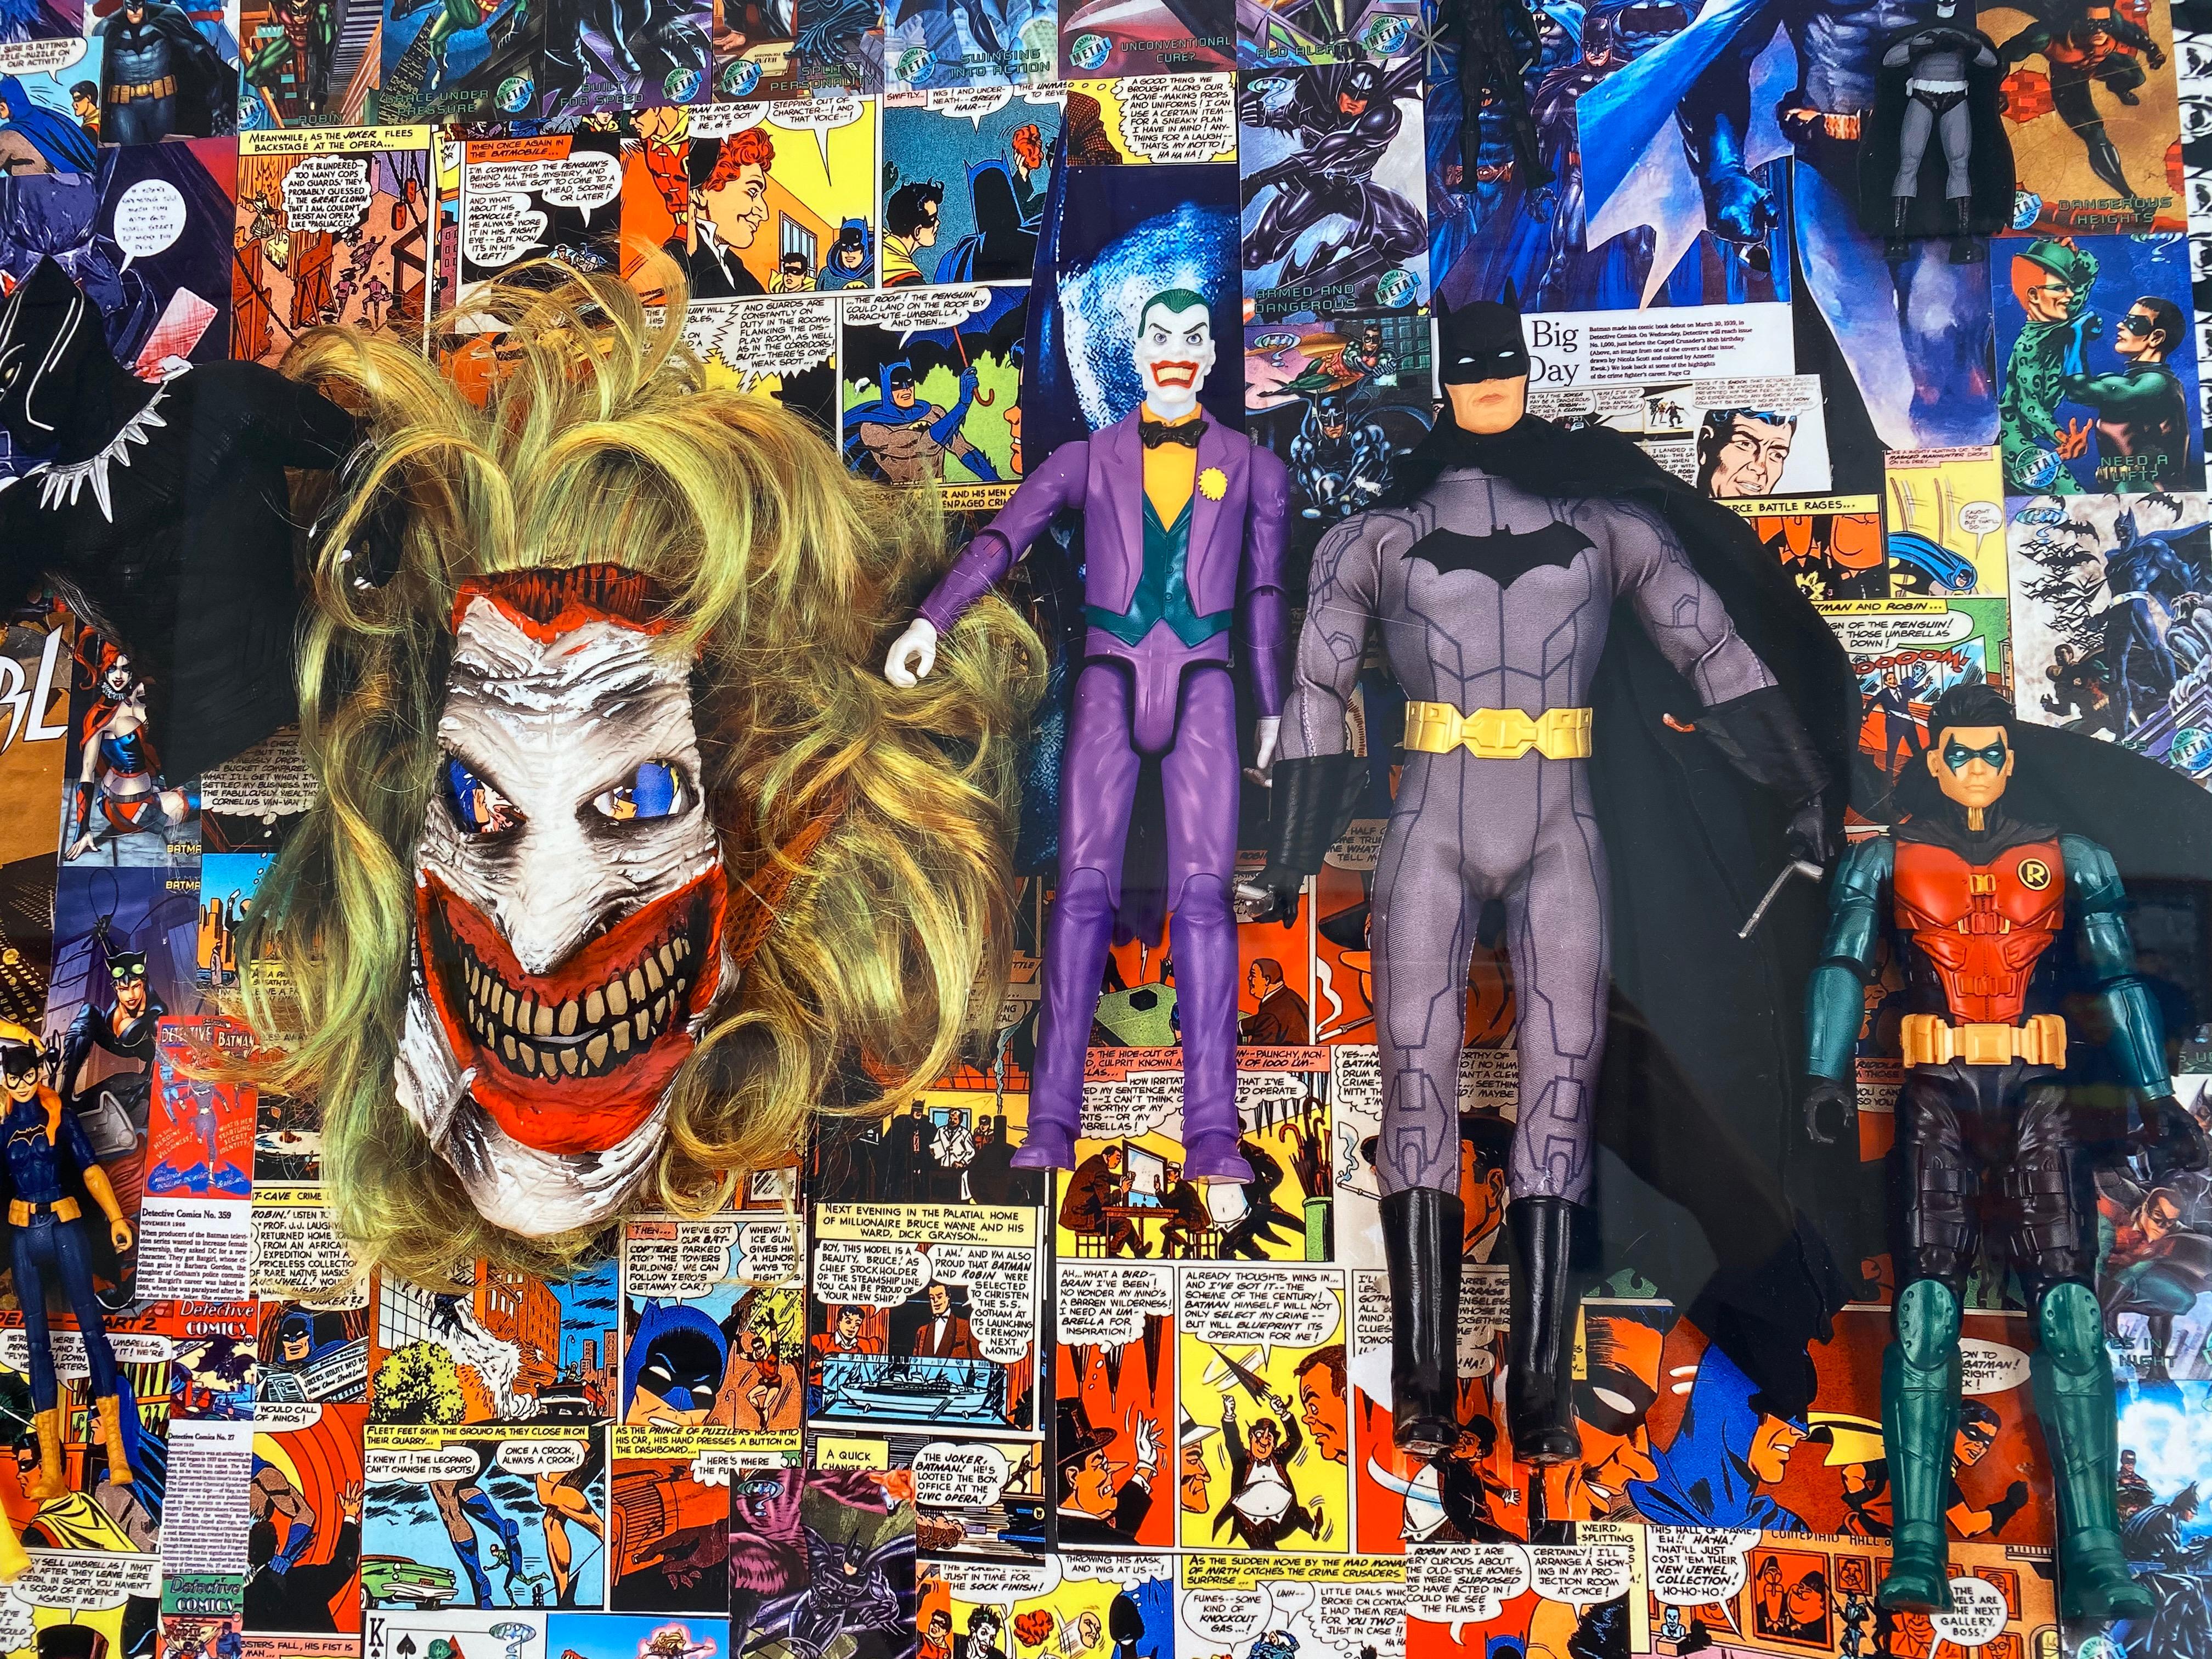 'Batman and Friends' by DJ Leon, 2020. The print measures 25 x 32 inches and is also available in a 30 x 23 3D backlit print. This dye-sublimation print on aluminum combines and appropriates Batman imagery along with commercial memorabilia such as